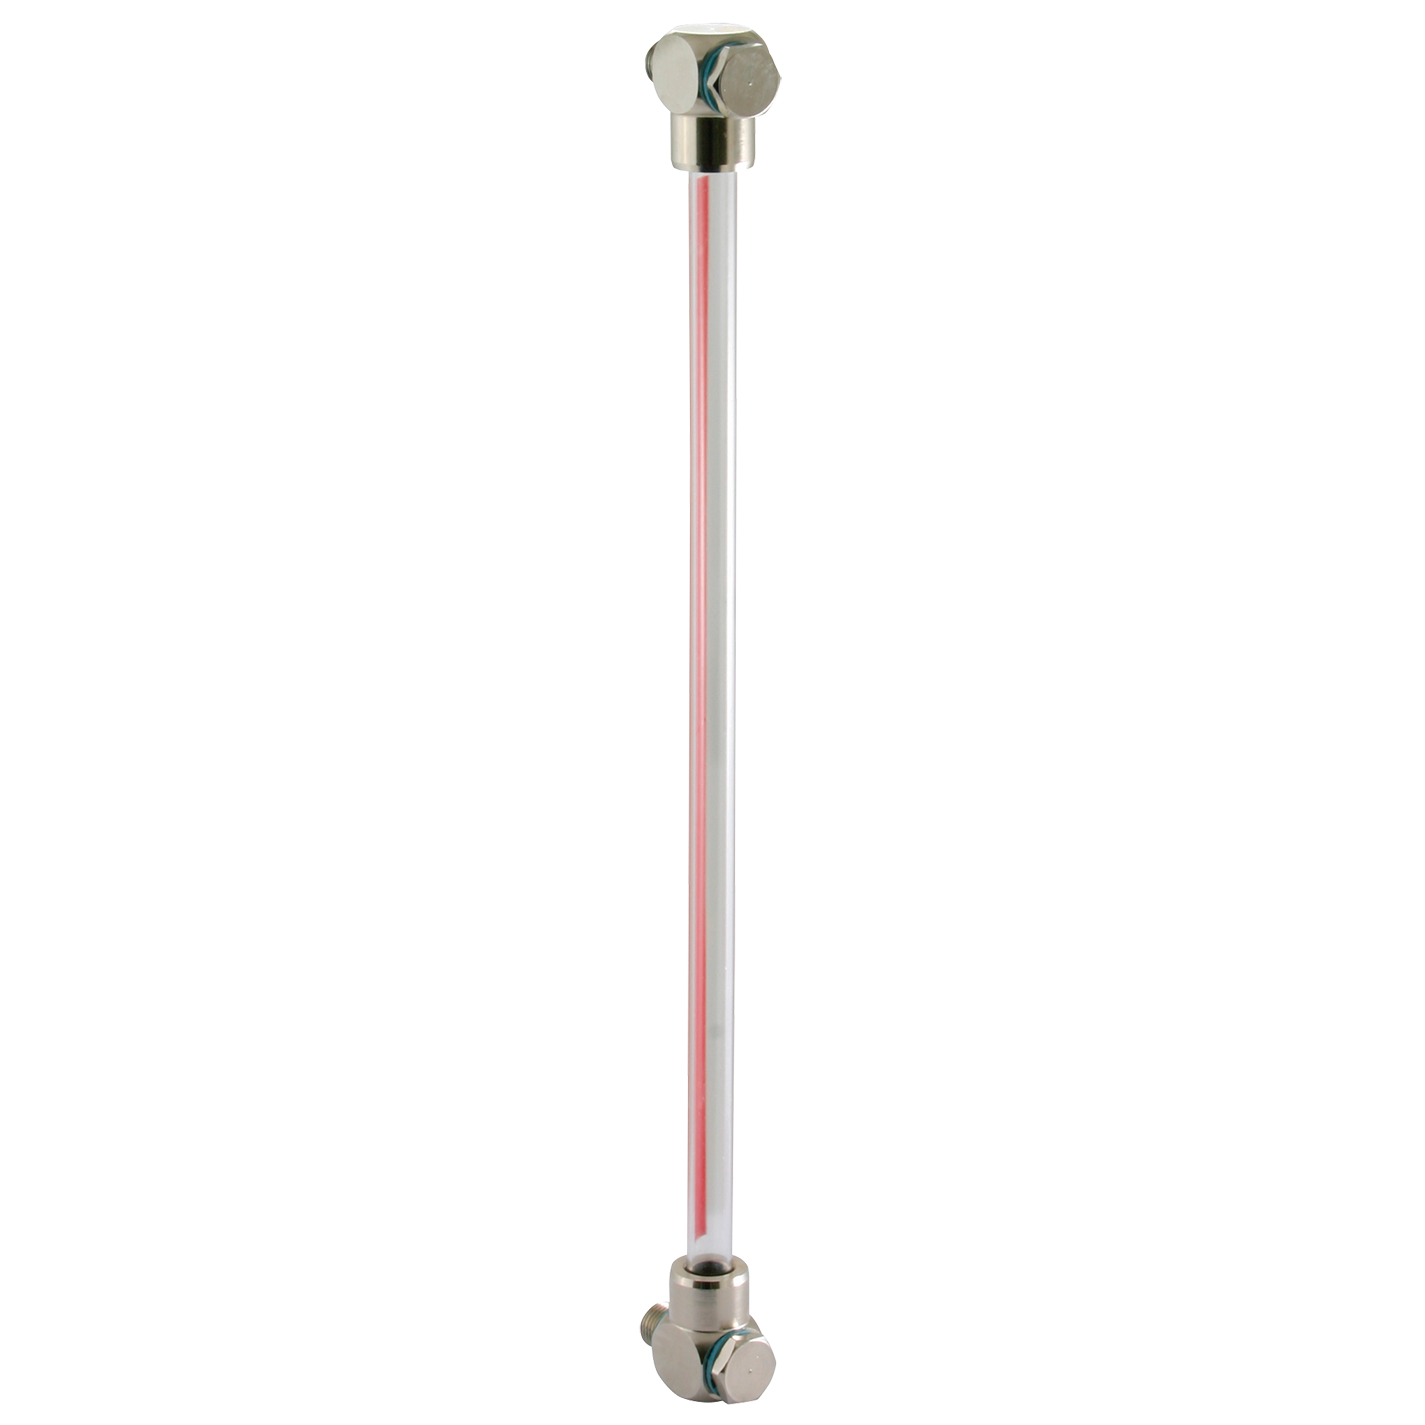 1/4" BSP Fluid Level Gauge W/O Thermometer Centres 950mm